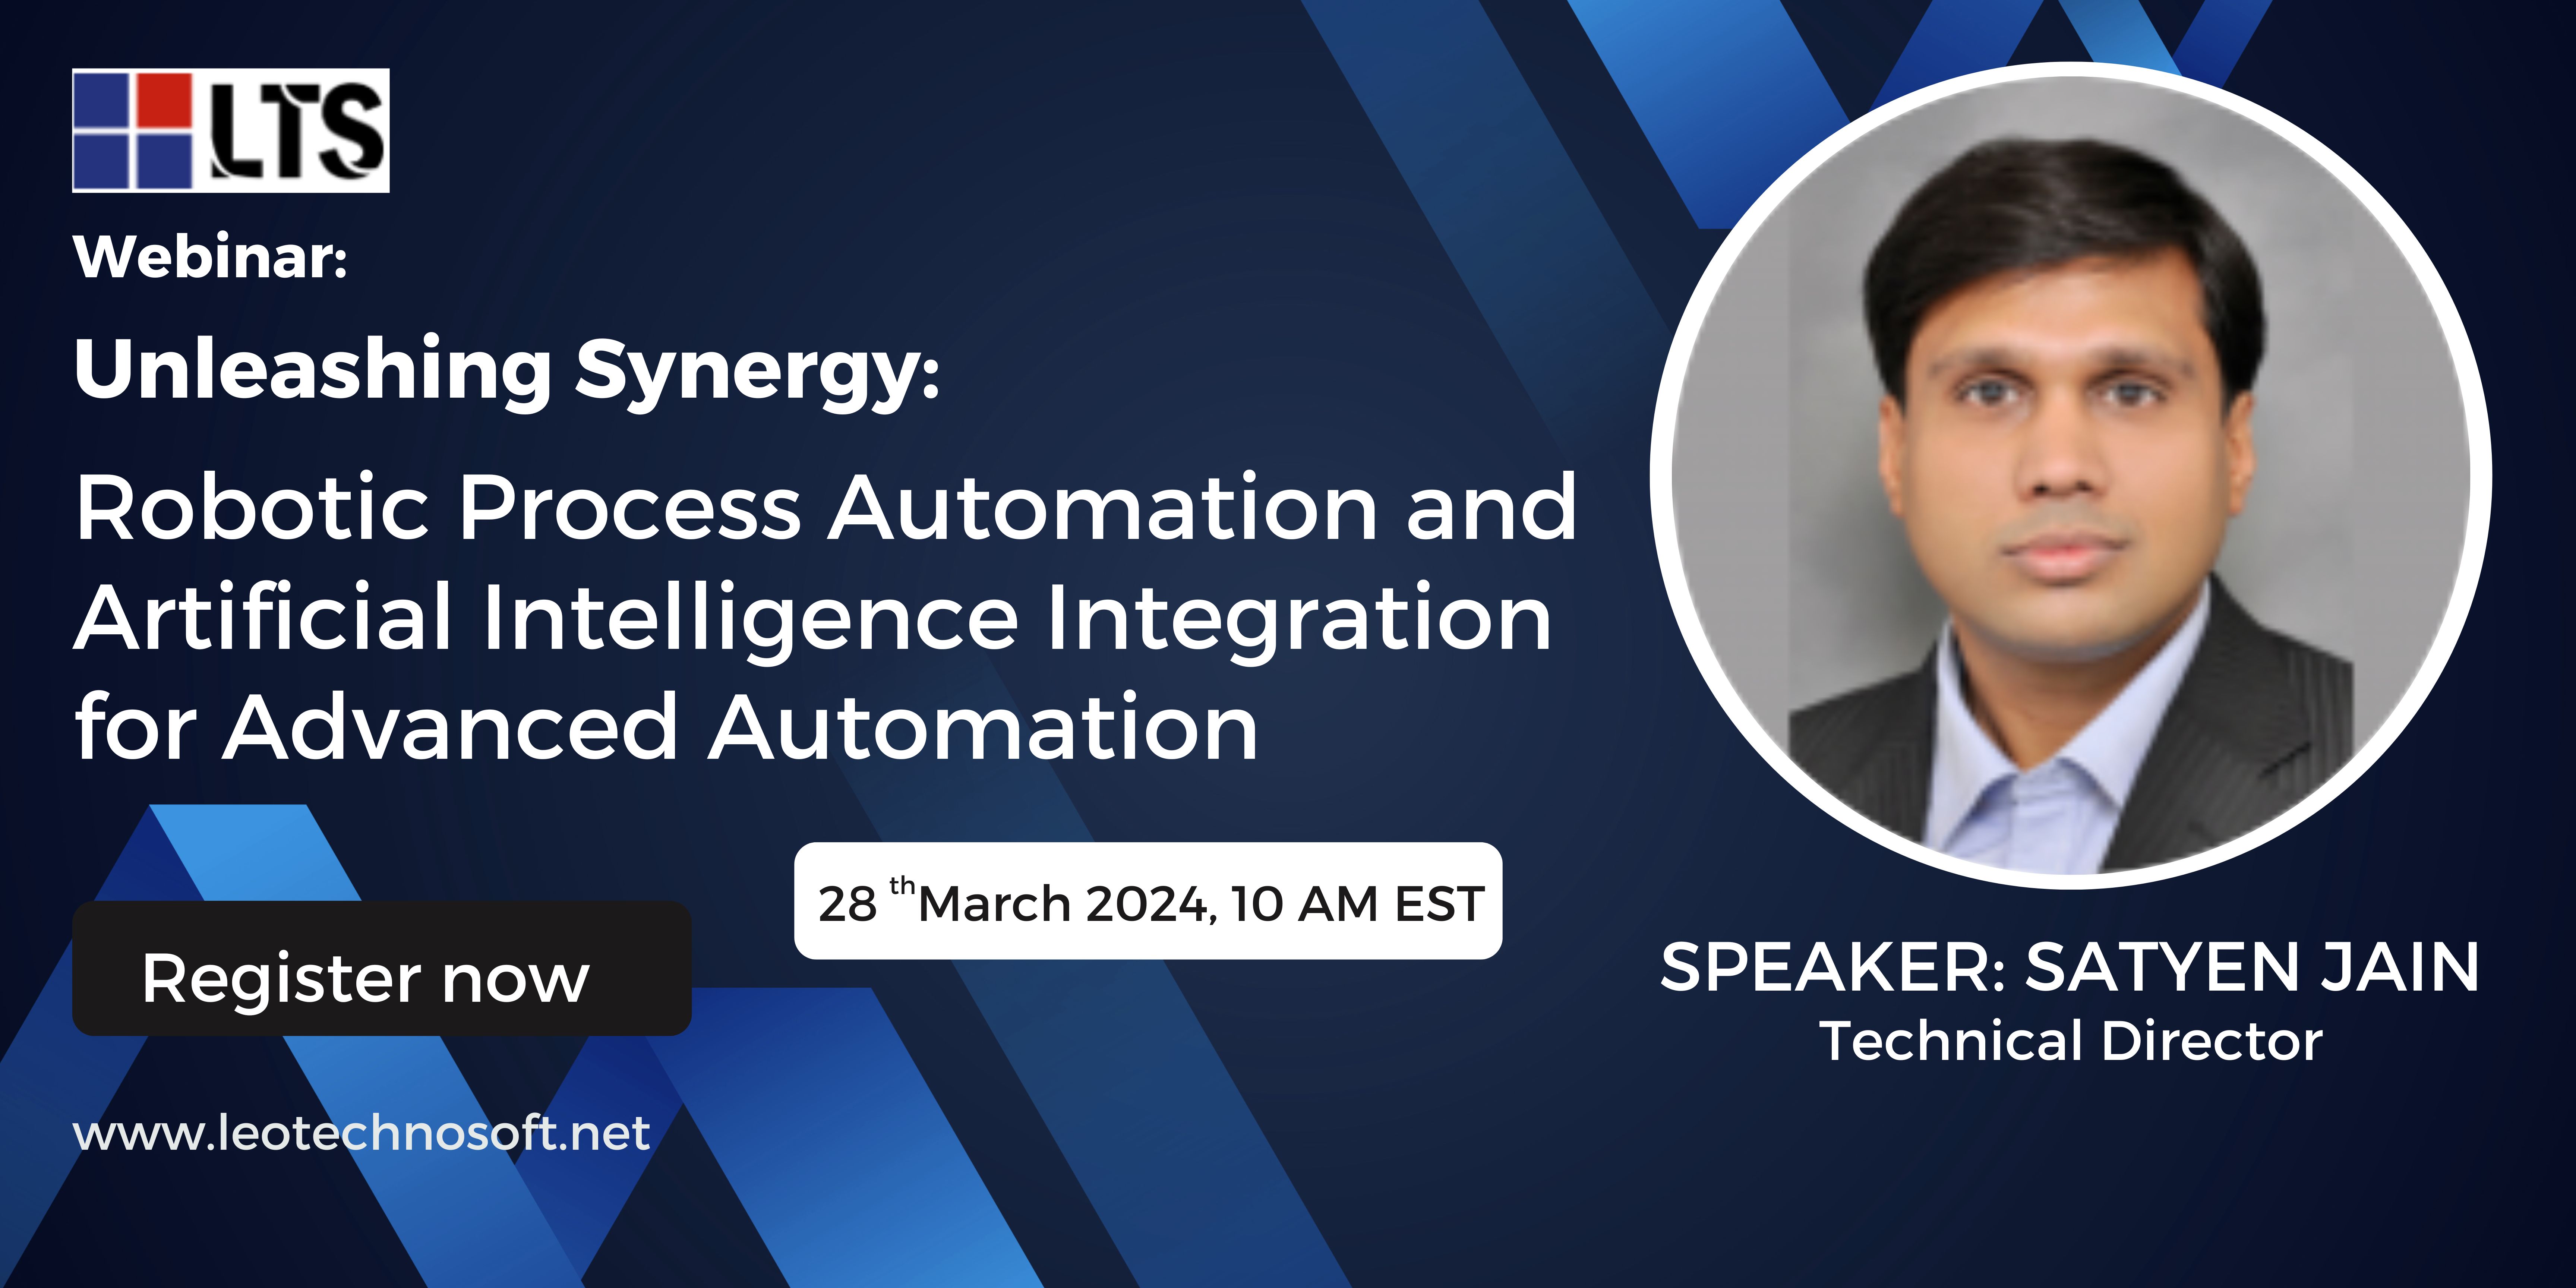 Robotic Process Automation And Artificial Intelligence Integration, Online Event